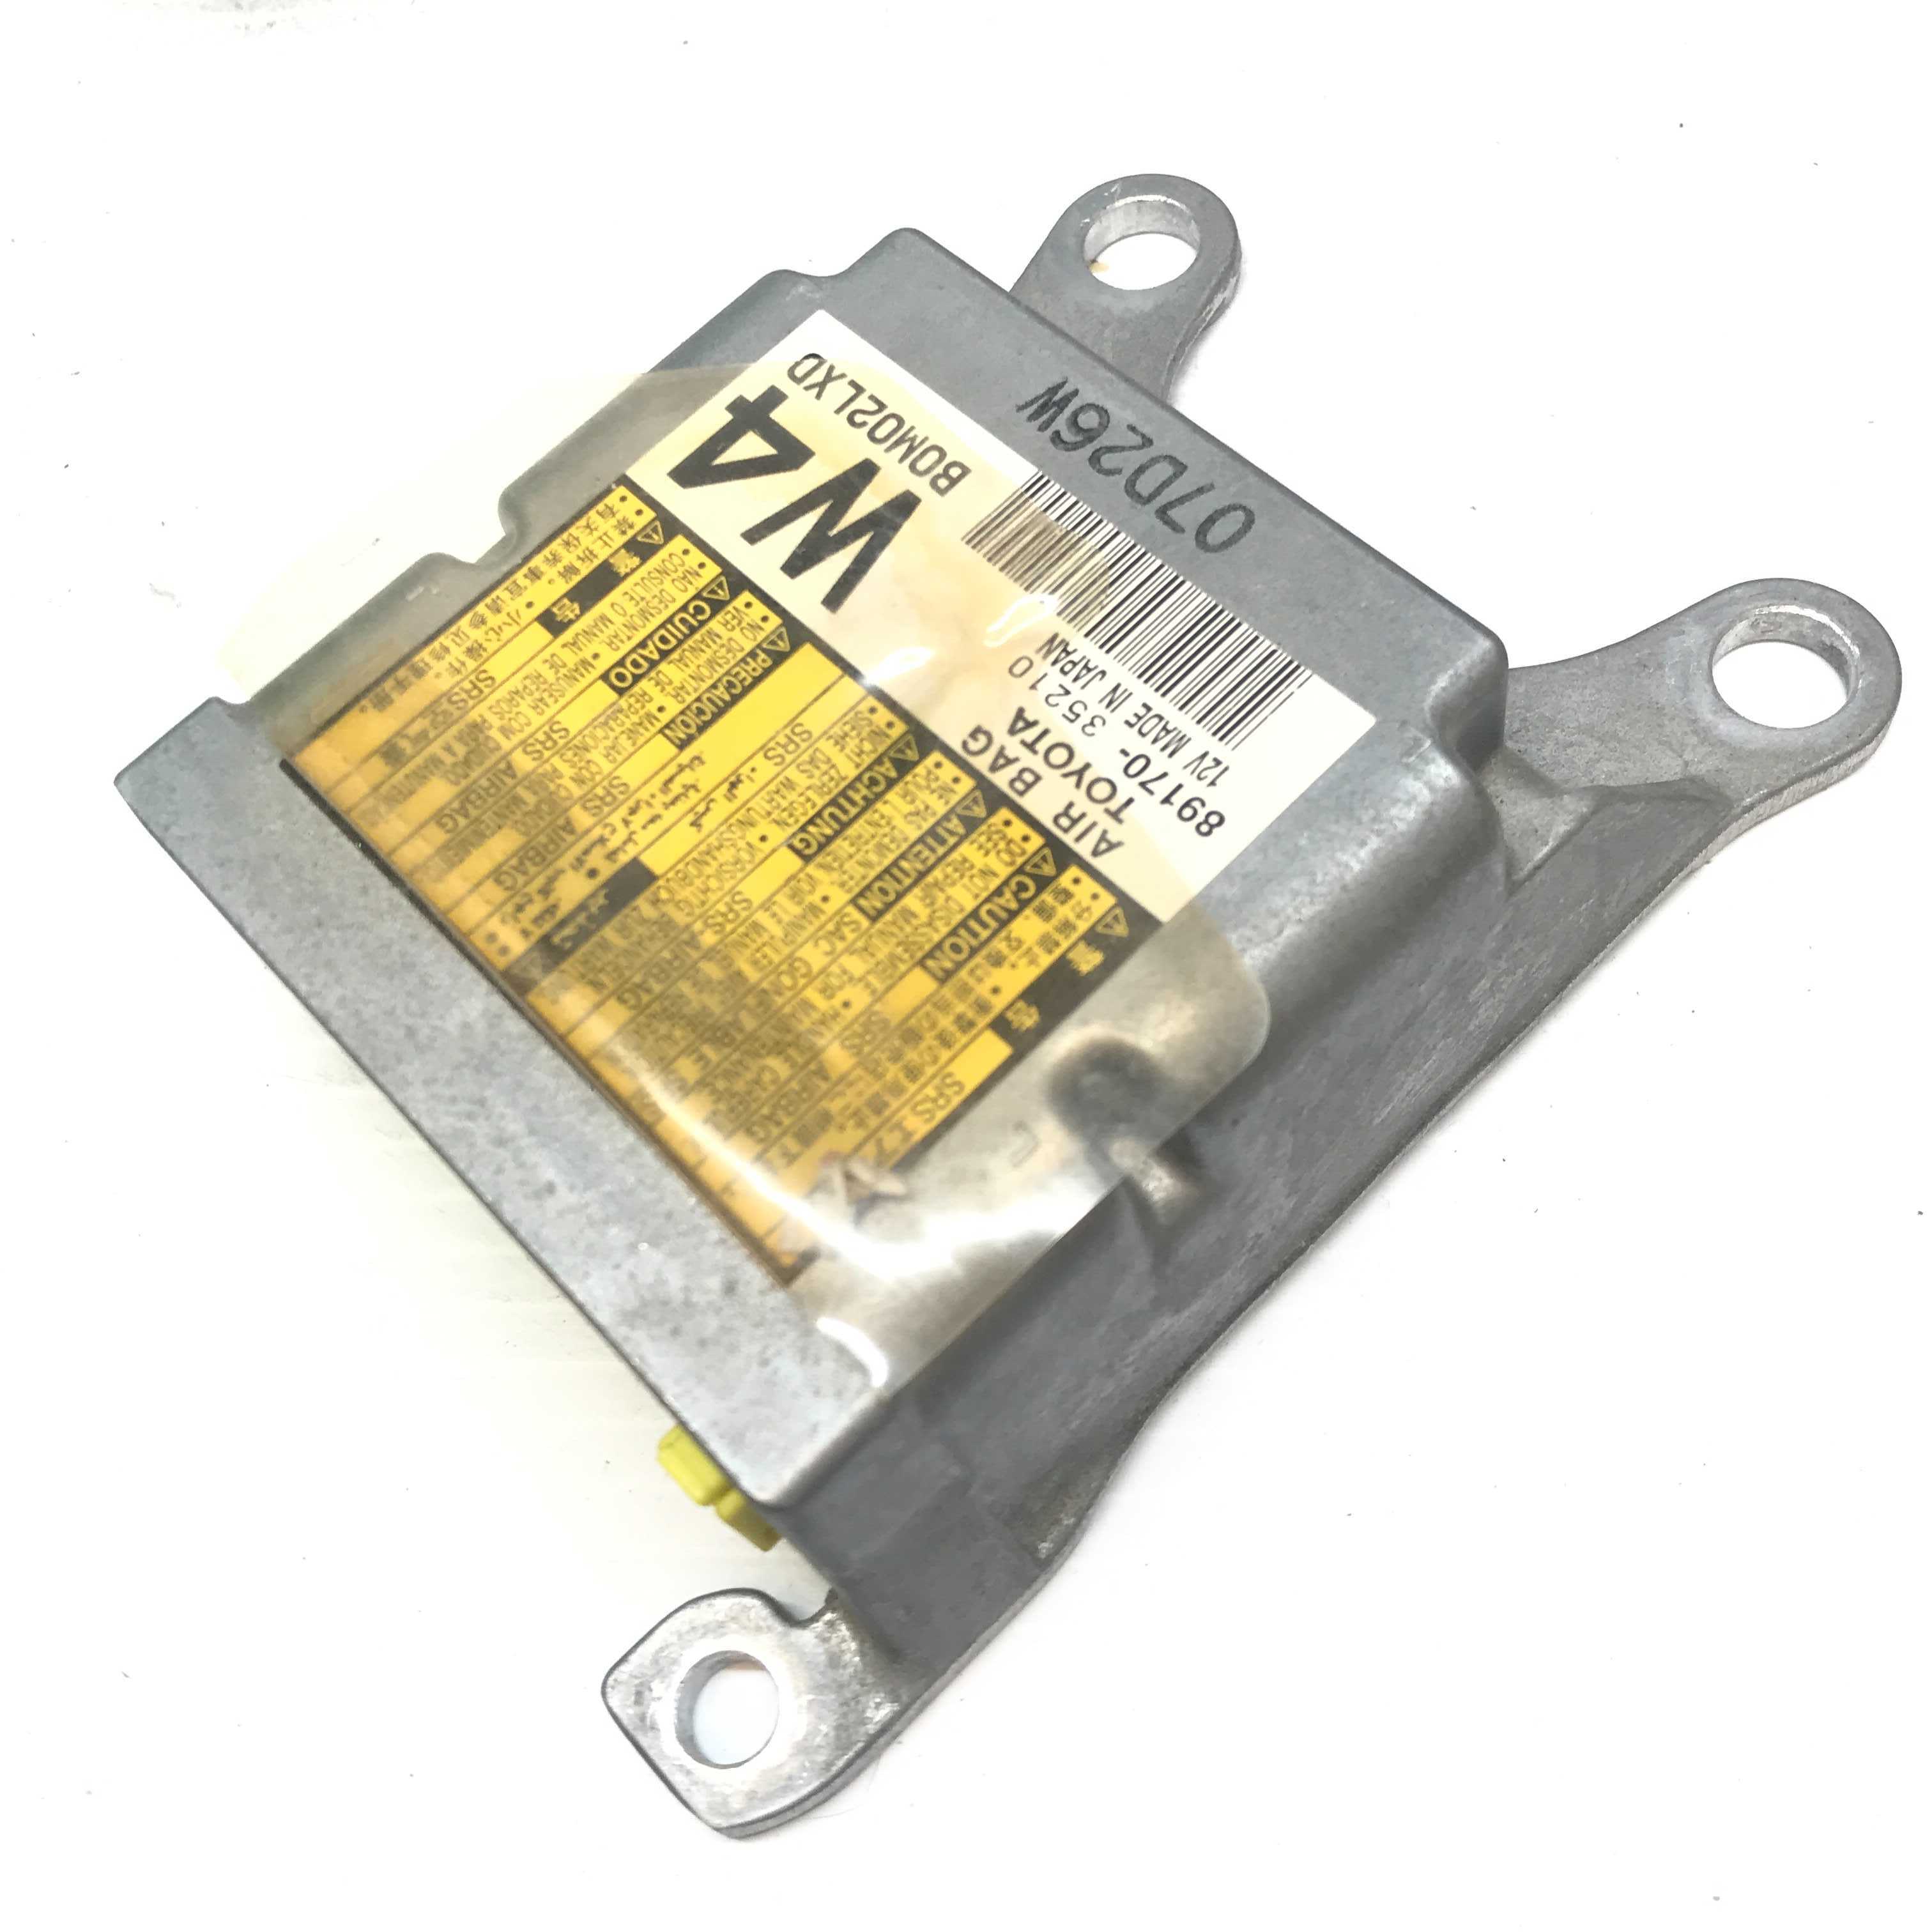 TOYOTA 4 RUNNER SRS Airbag Computer Diagnostic Control Module PART #8917035210